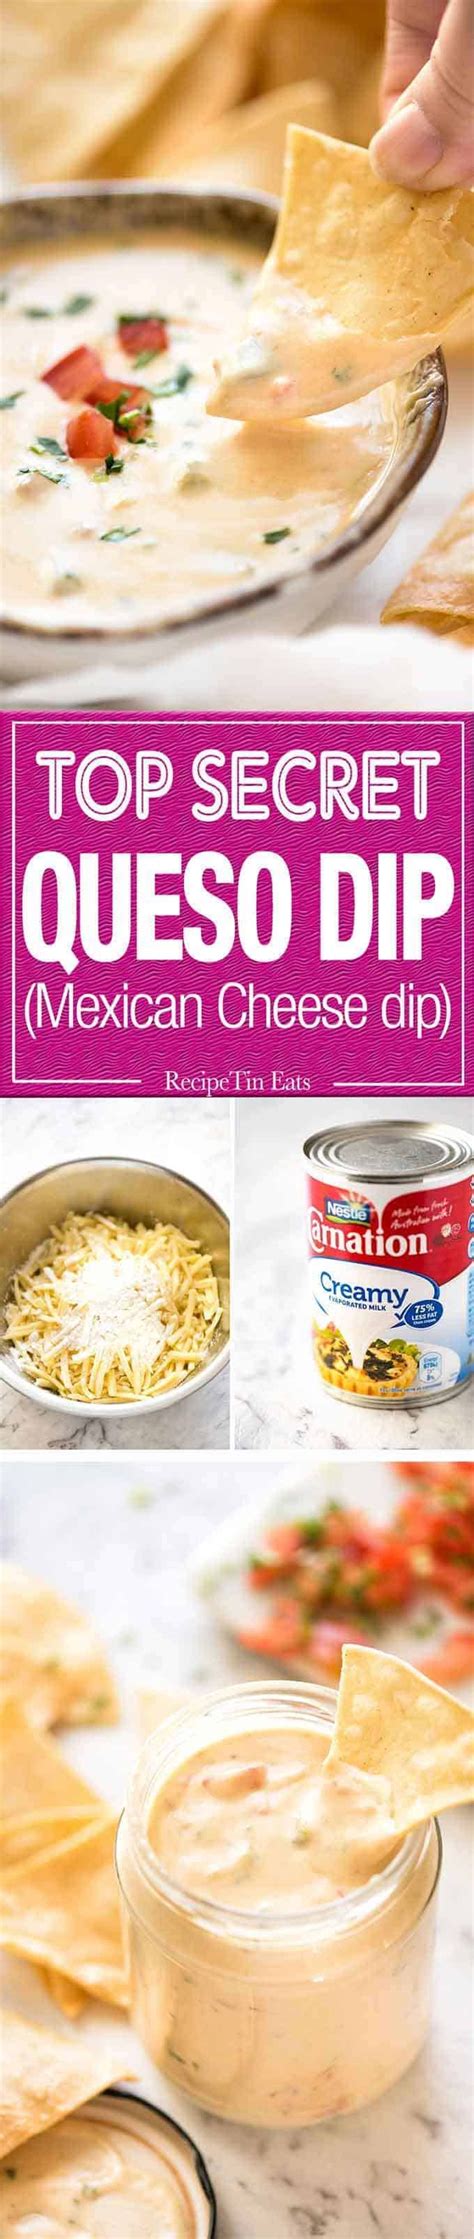 The Top Secret Queso Dip Mexican Cheese Dip Is Shown In Three Different